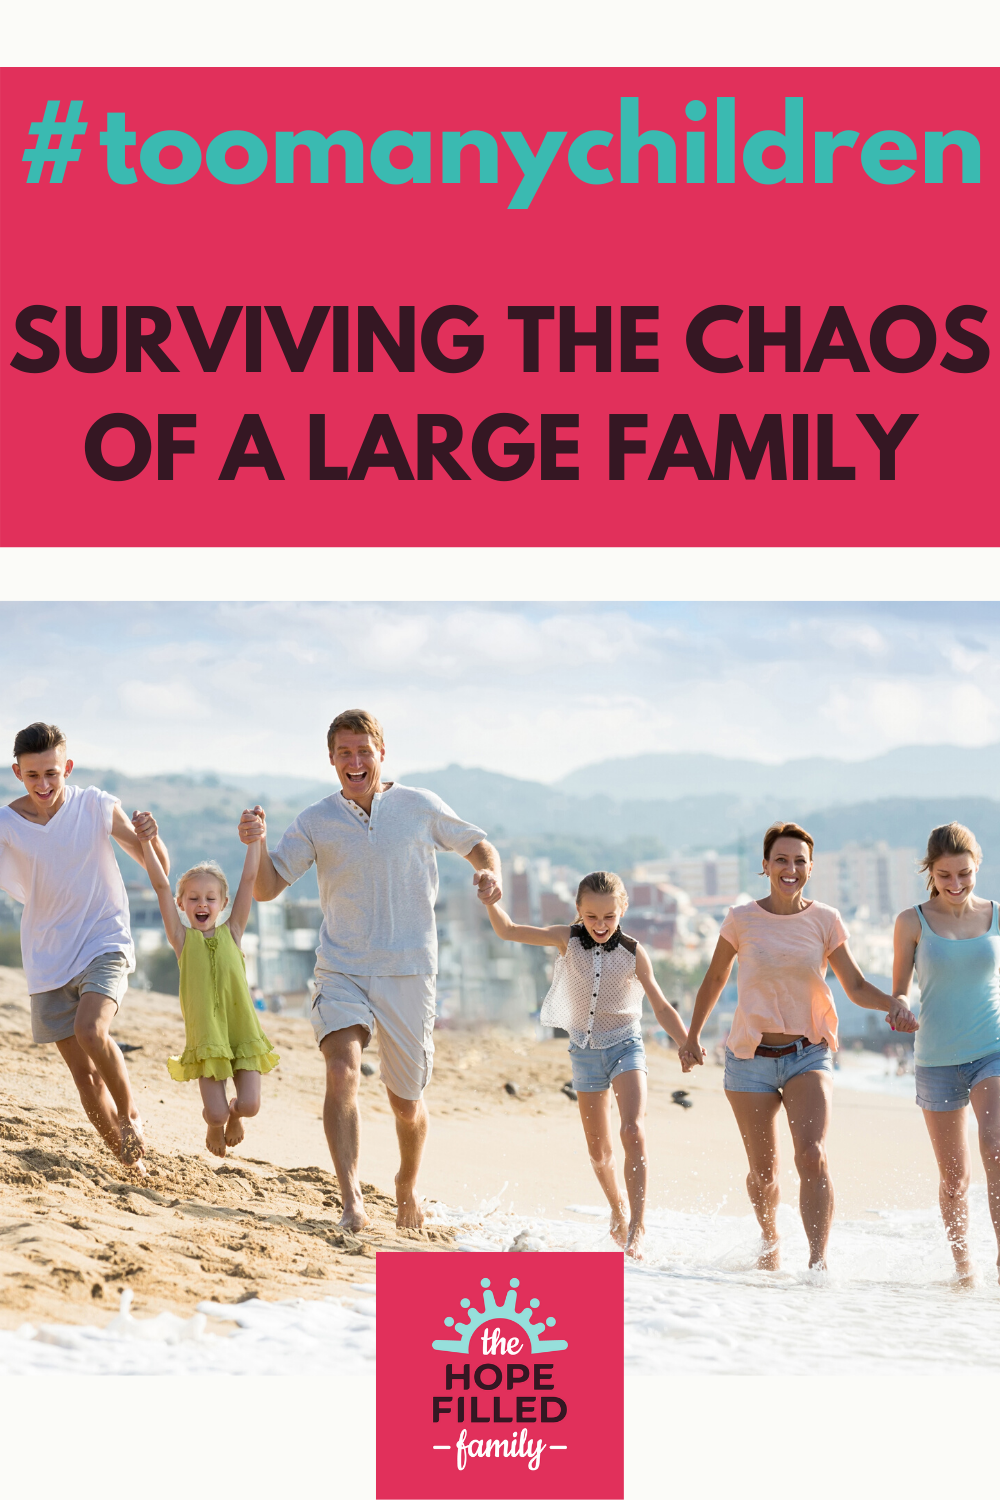 What is it like to have a large family?